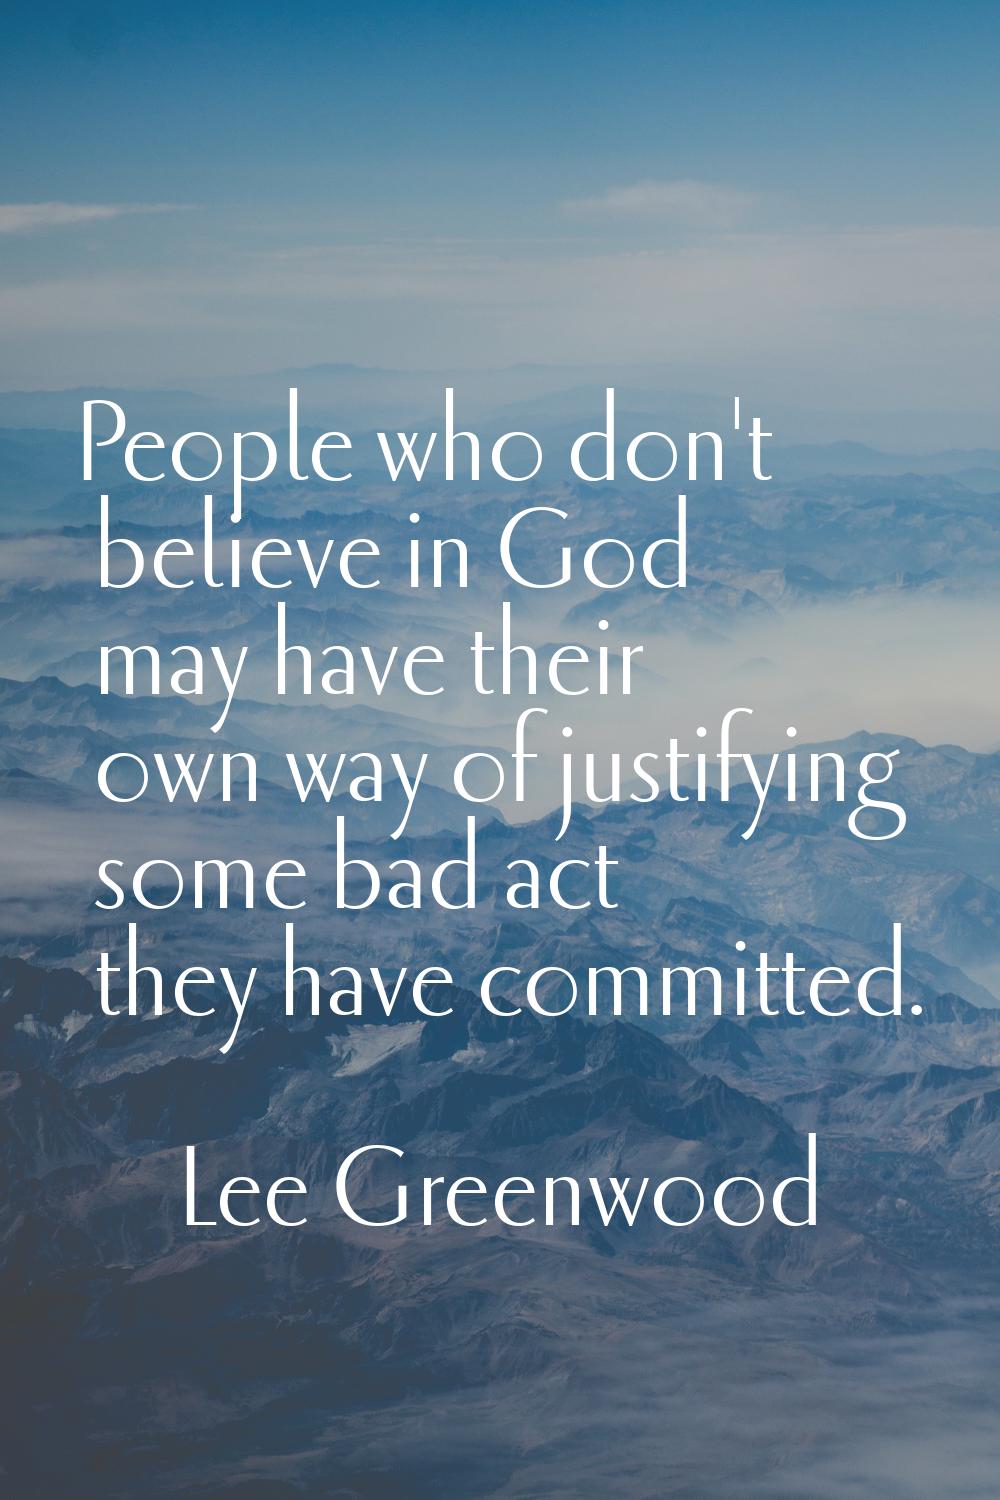 People who don't believe in God may have their own way of justifying some bad act they have committ